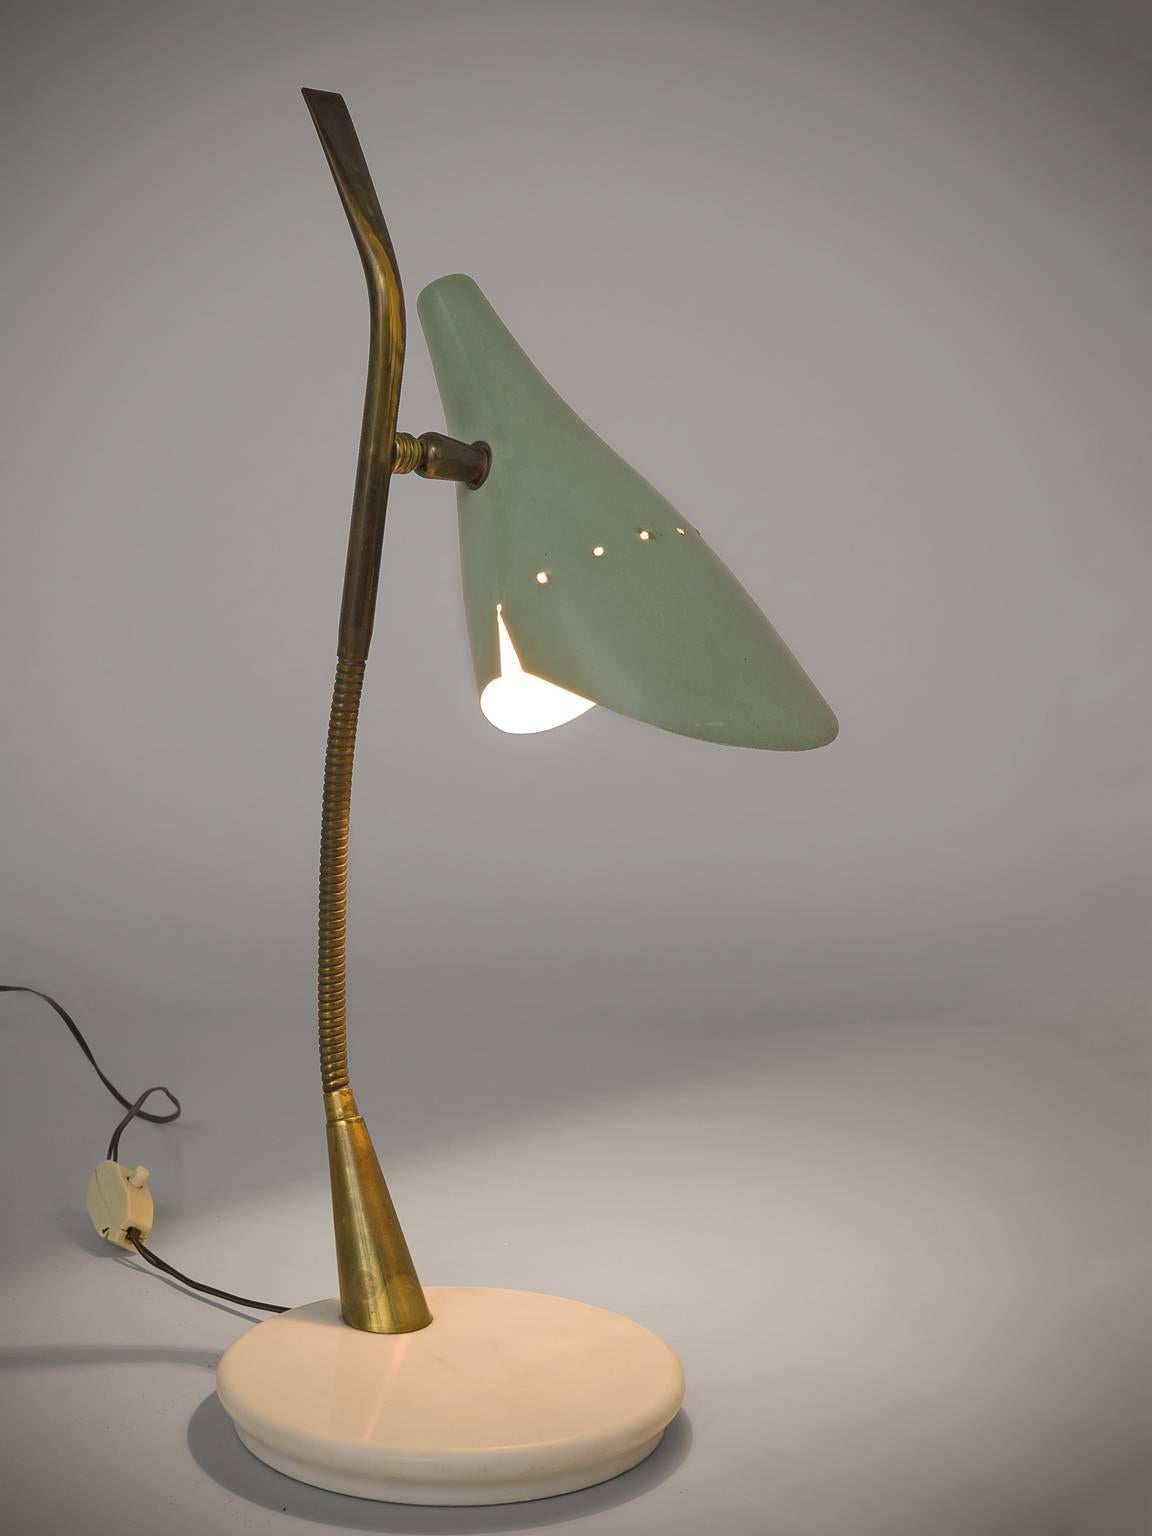 Osca Torlasco, table lamp, green-blue metal, bras and marble, Italy, 1950s.

This 1950s adjustable sea green light is manufactured by Lumen. The metal shade is connected to a flexible brass colored brass arm resting on a round marble base. Very